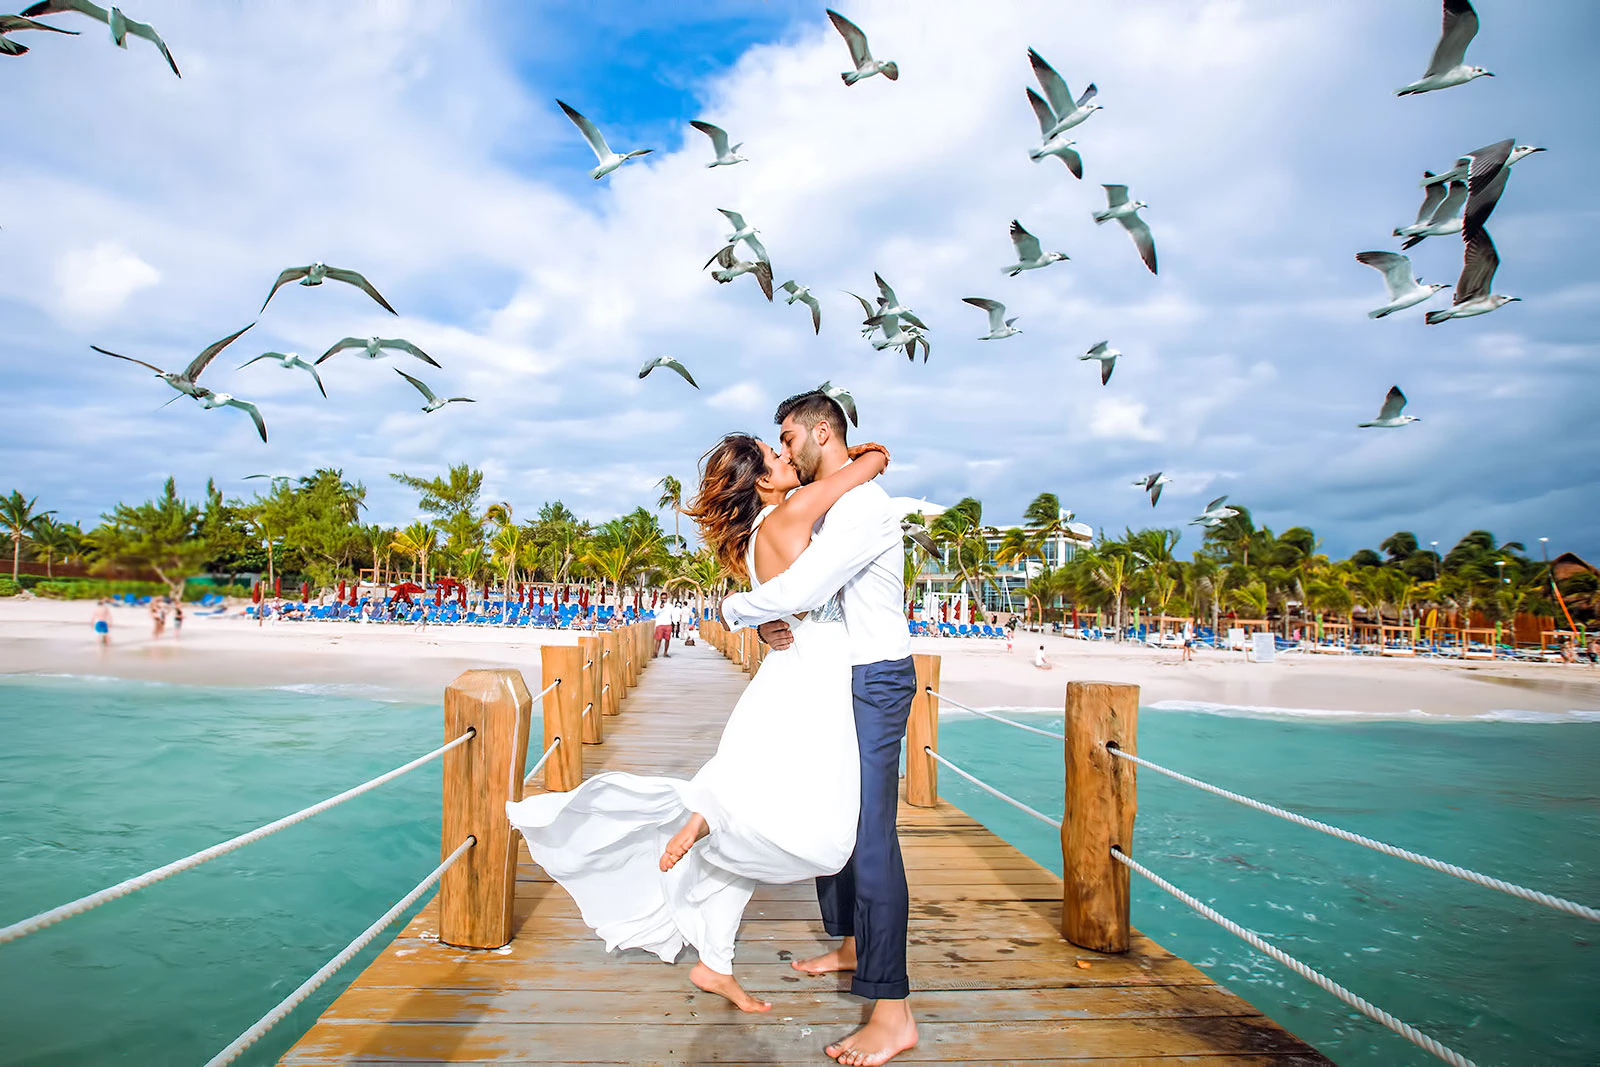 Best Things to Do in Cancun for Couples